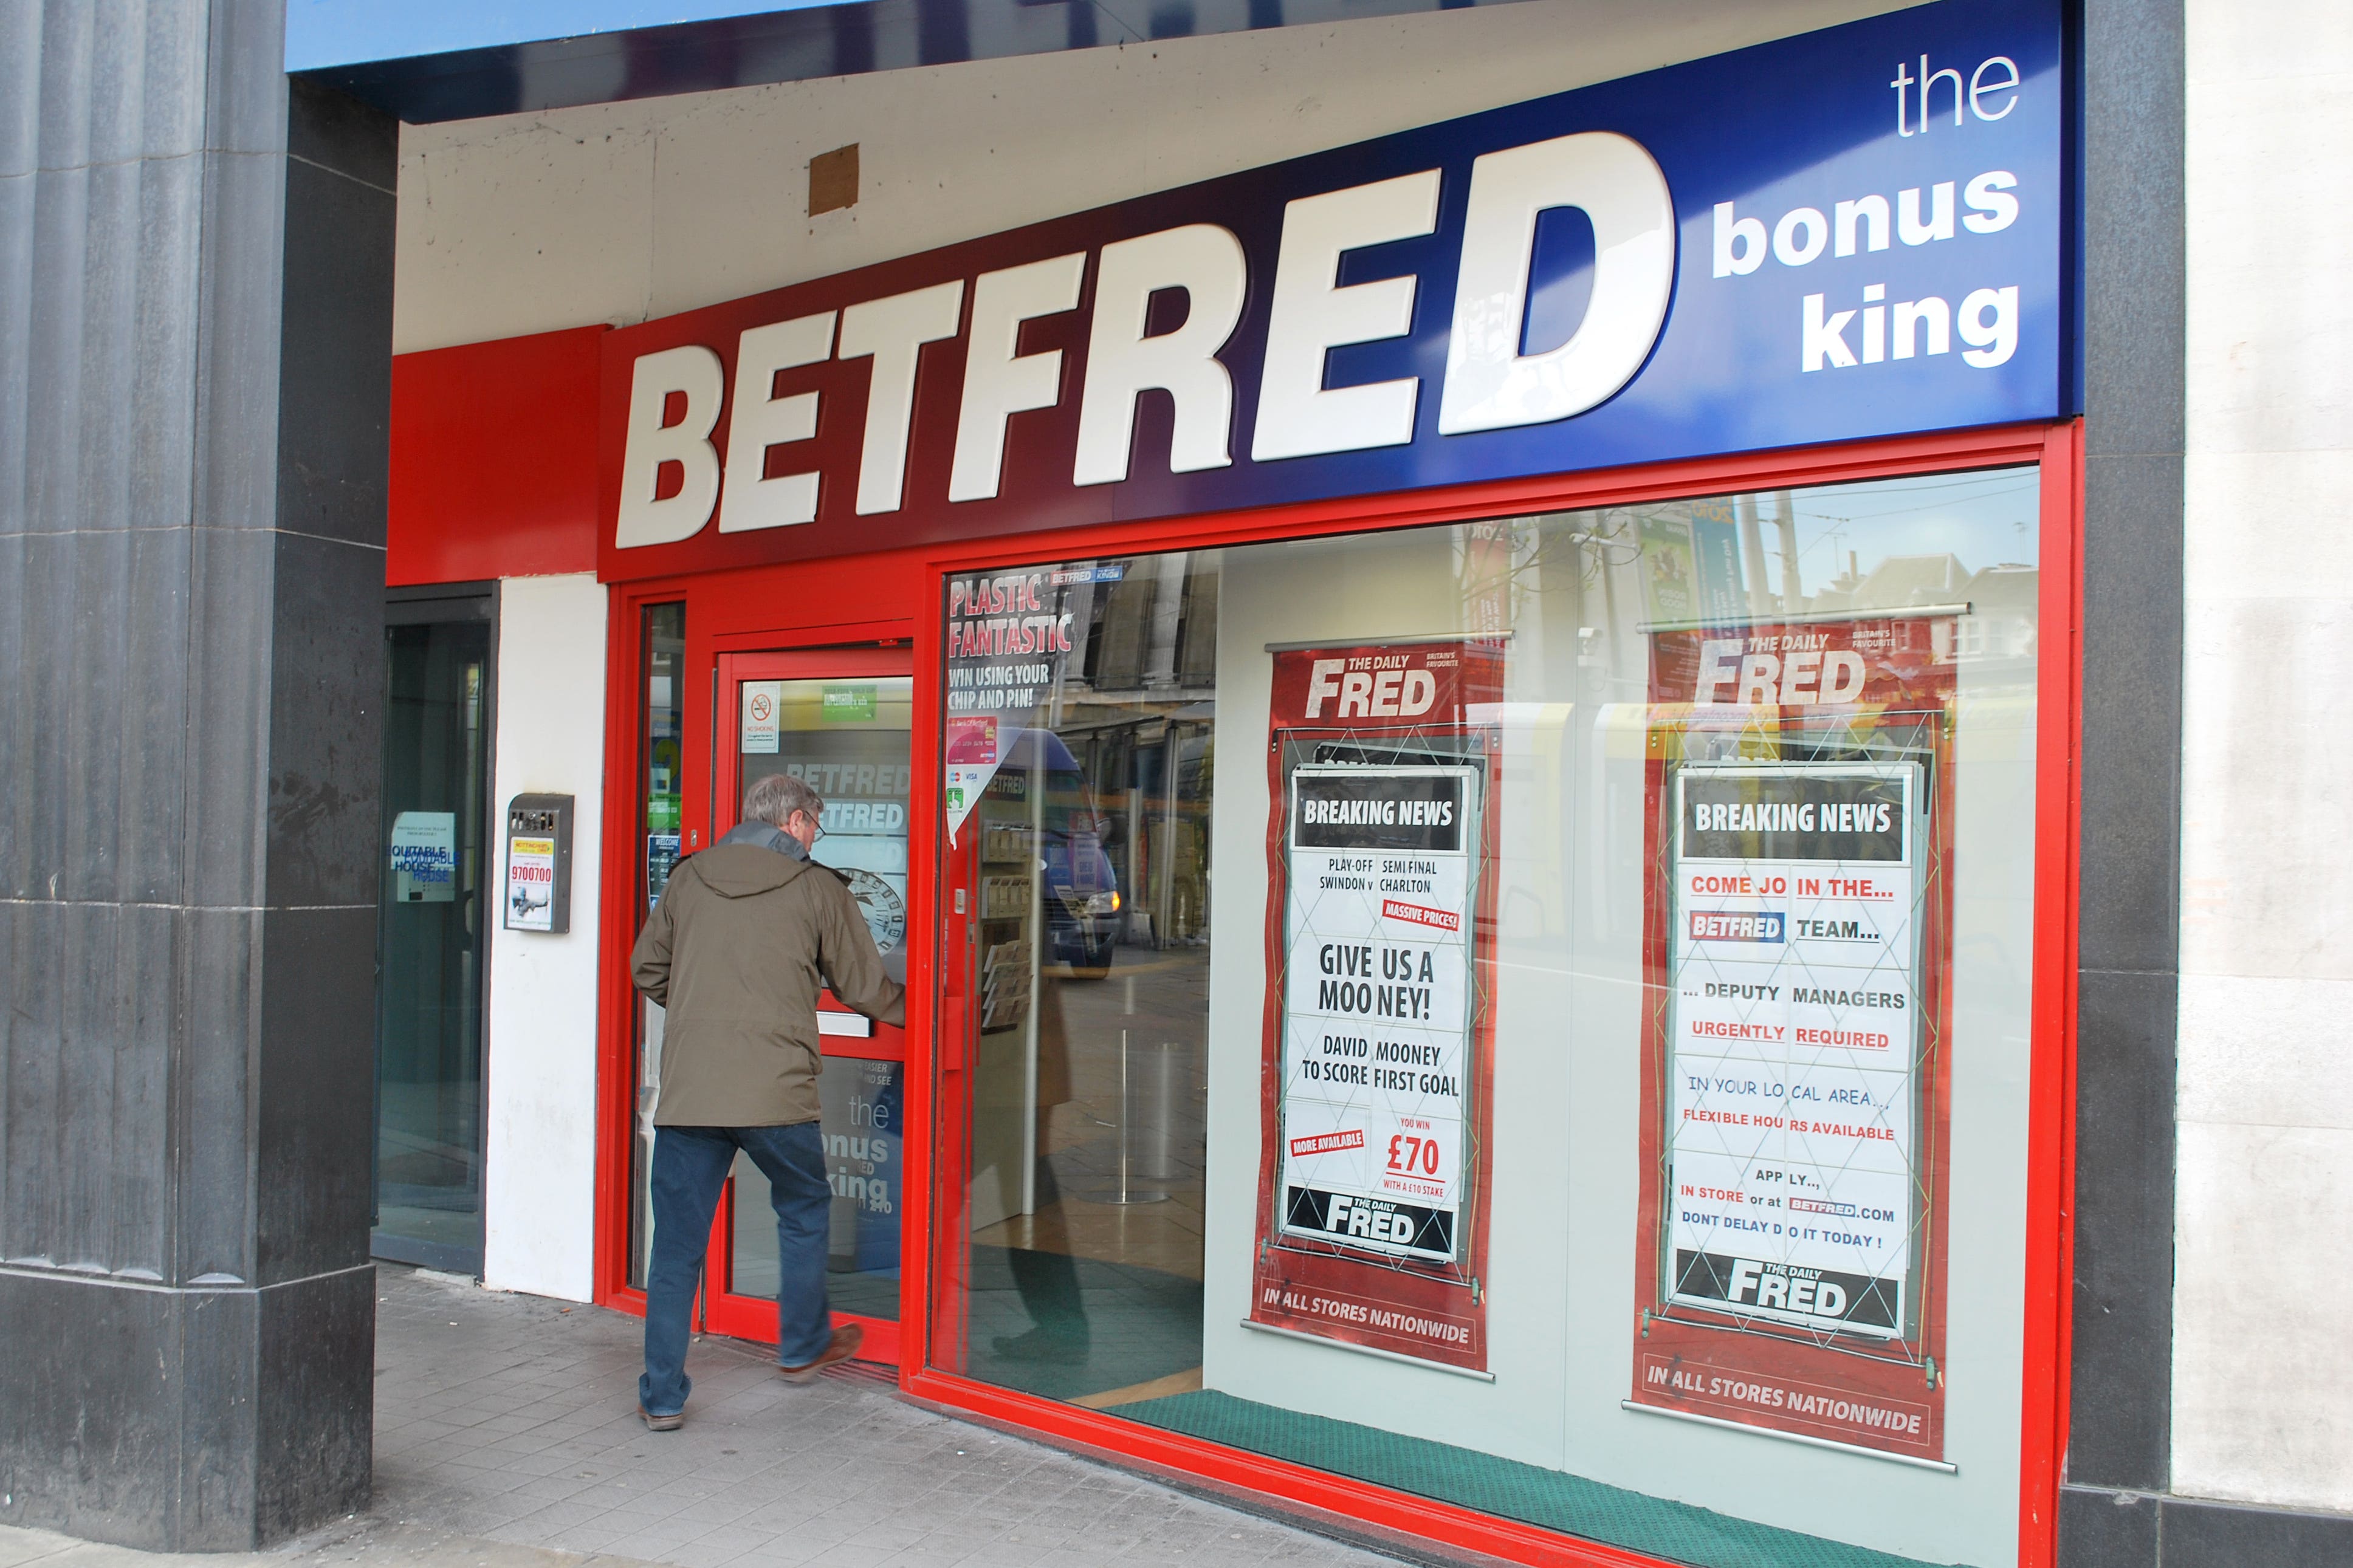 The Gambling Commission has told Betfred to pay £3.25m for social responsibility and anti-money laundering failures (Lewis Stickley/PA)